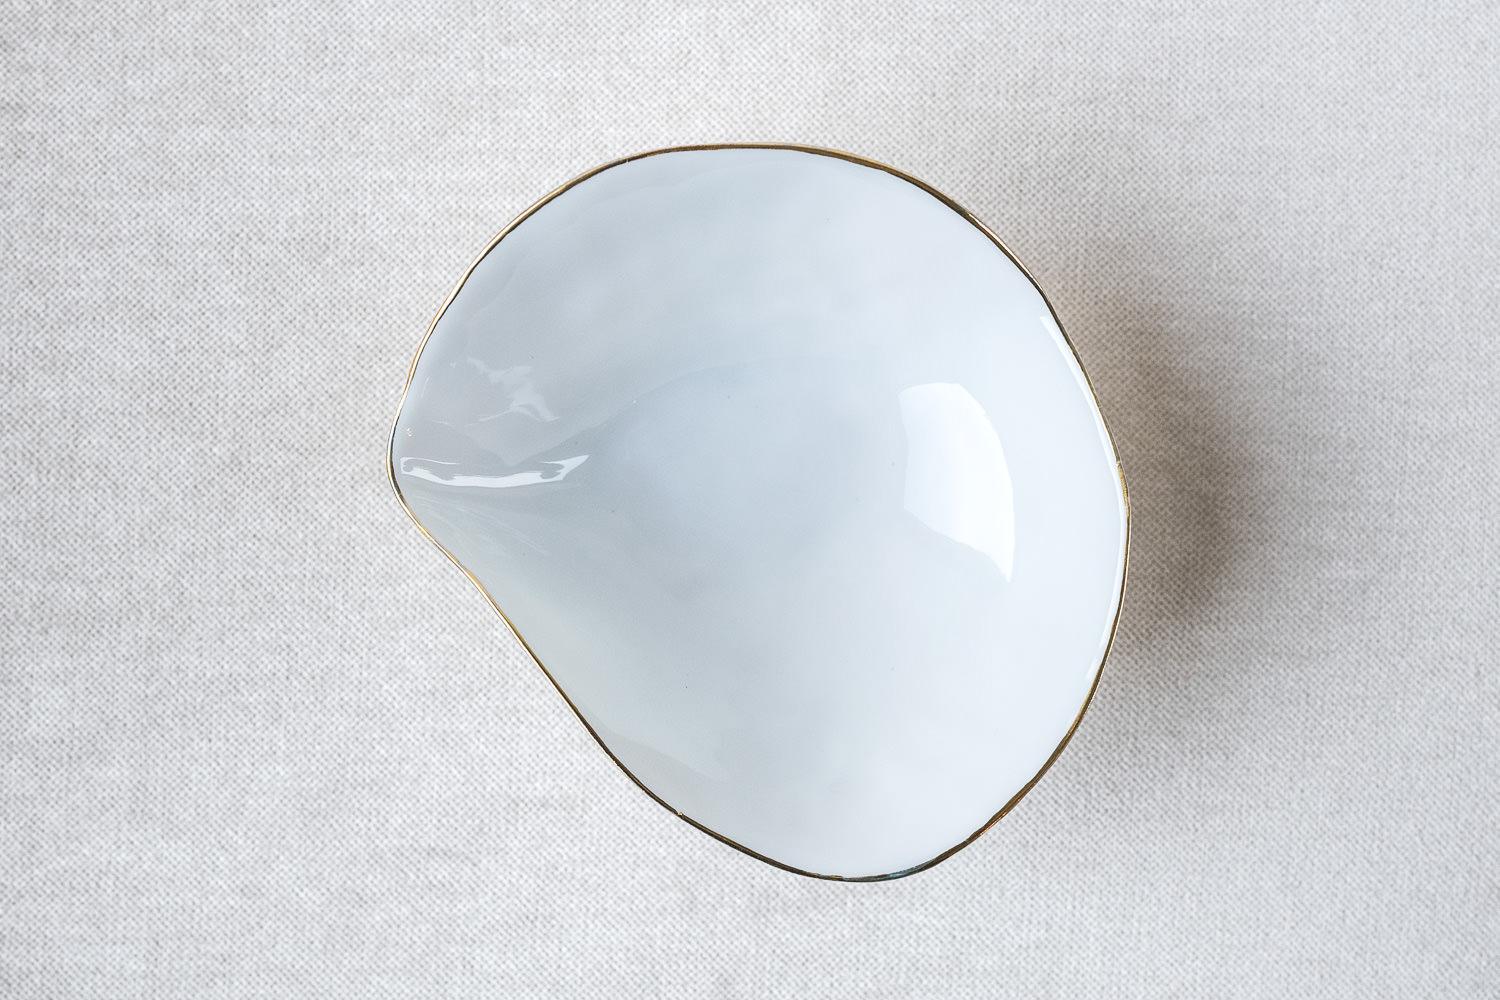 • Small side bowl
• Measures: 10.5cm x 11cm x 4.7cm
• Perfect for a sexy amuse-bouche, a pre-dessert or side dish
• White glazed top, unglazed textured bottom
• With a very luxurious handpainted 24k golden rim 
• Designed in Amsterdam /